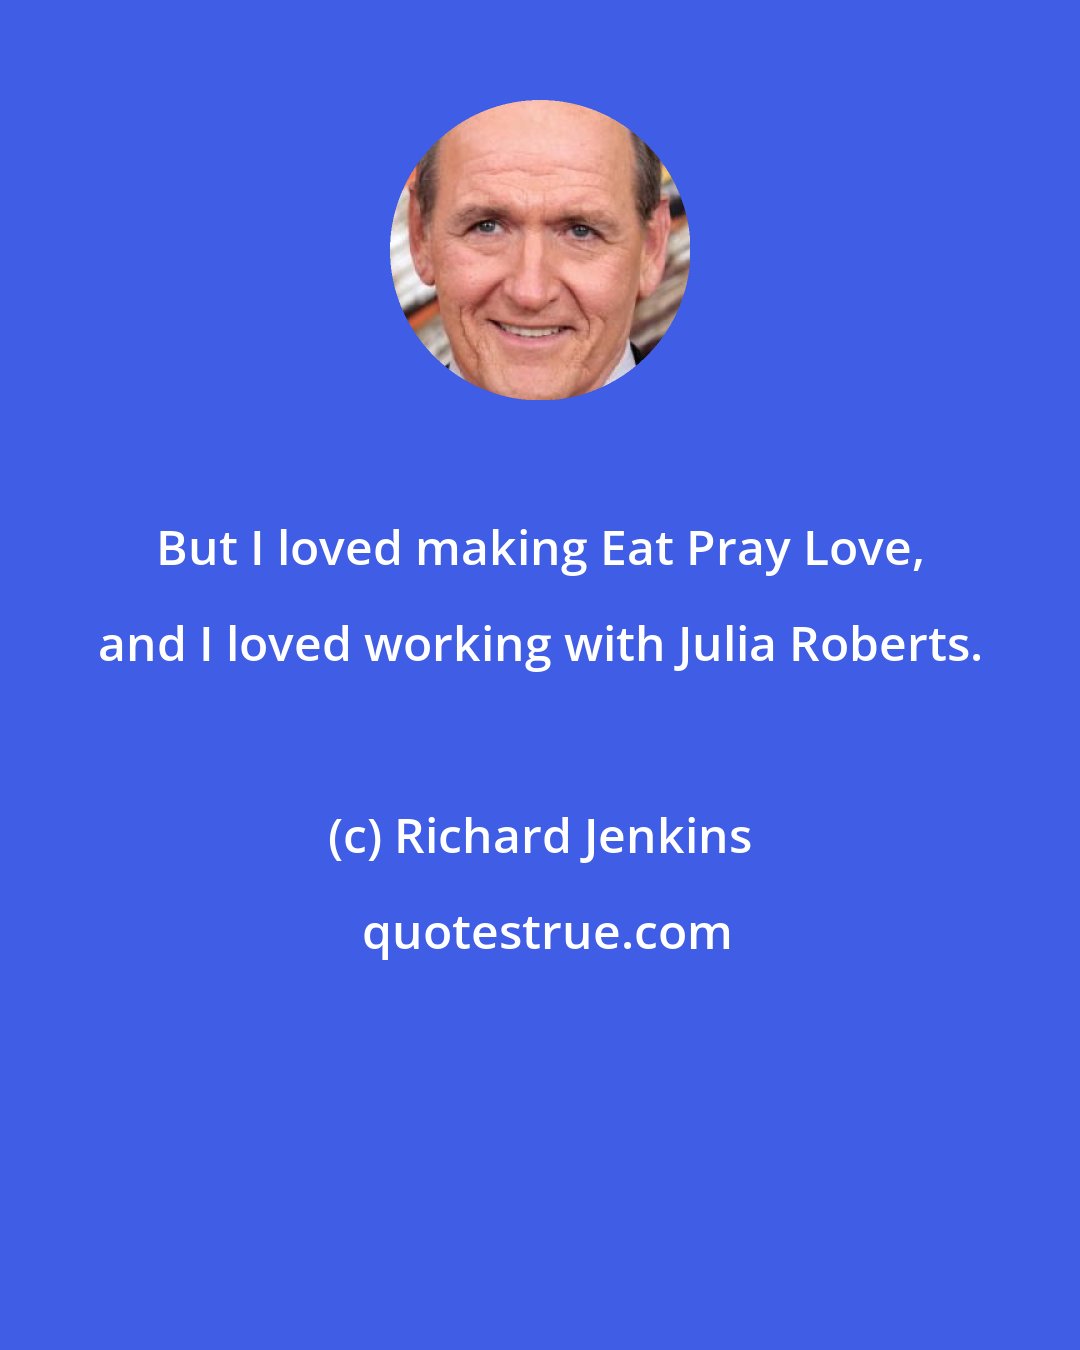 Richard Jenkins: But I loved making Eat Pray Love, and I loved working with Julia Roberts.